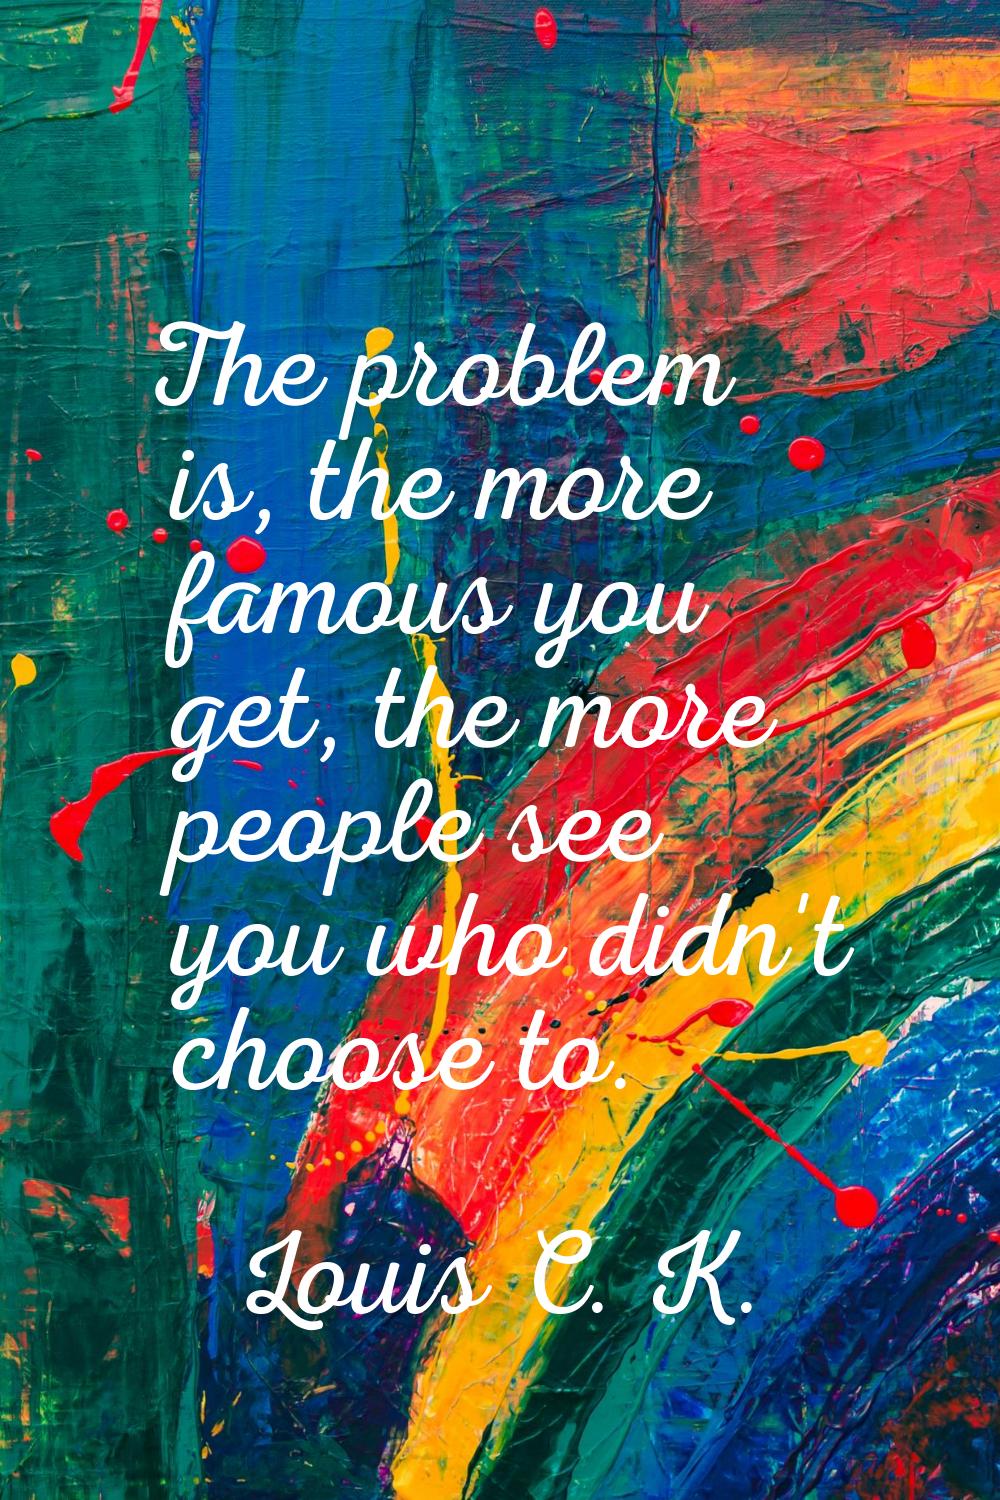 The problem is, the more famous you get, the more people see you who didn't choose to.